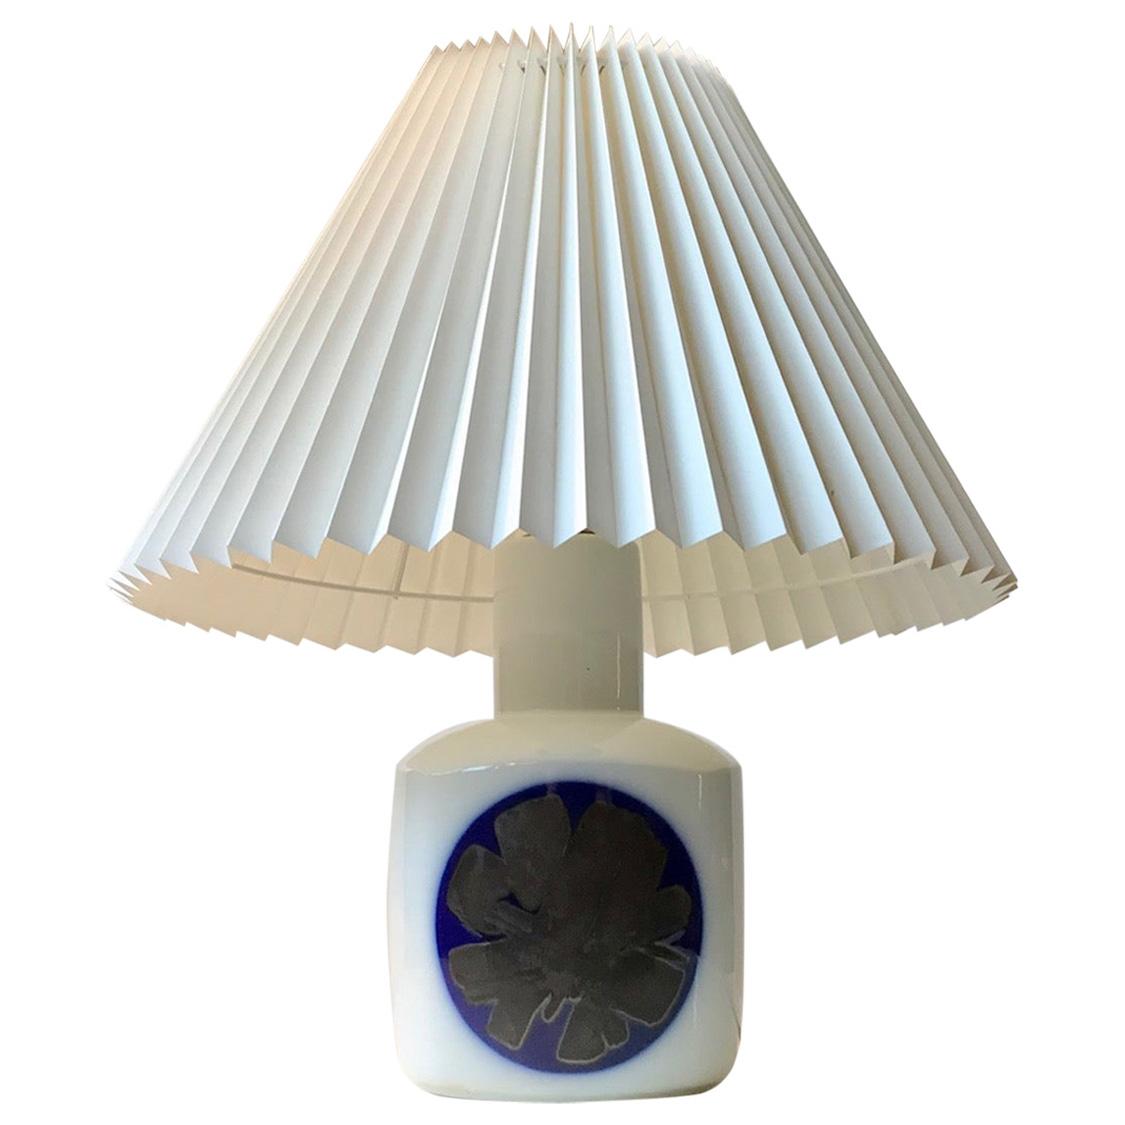 Vintage Bing & Grøndahl Porcelain Table Lamp with Abstract Blue Decor, 1970s